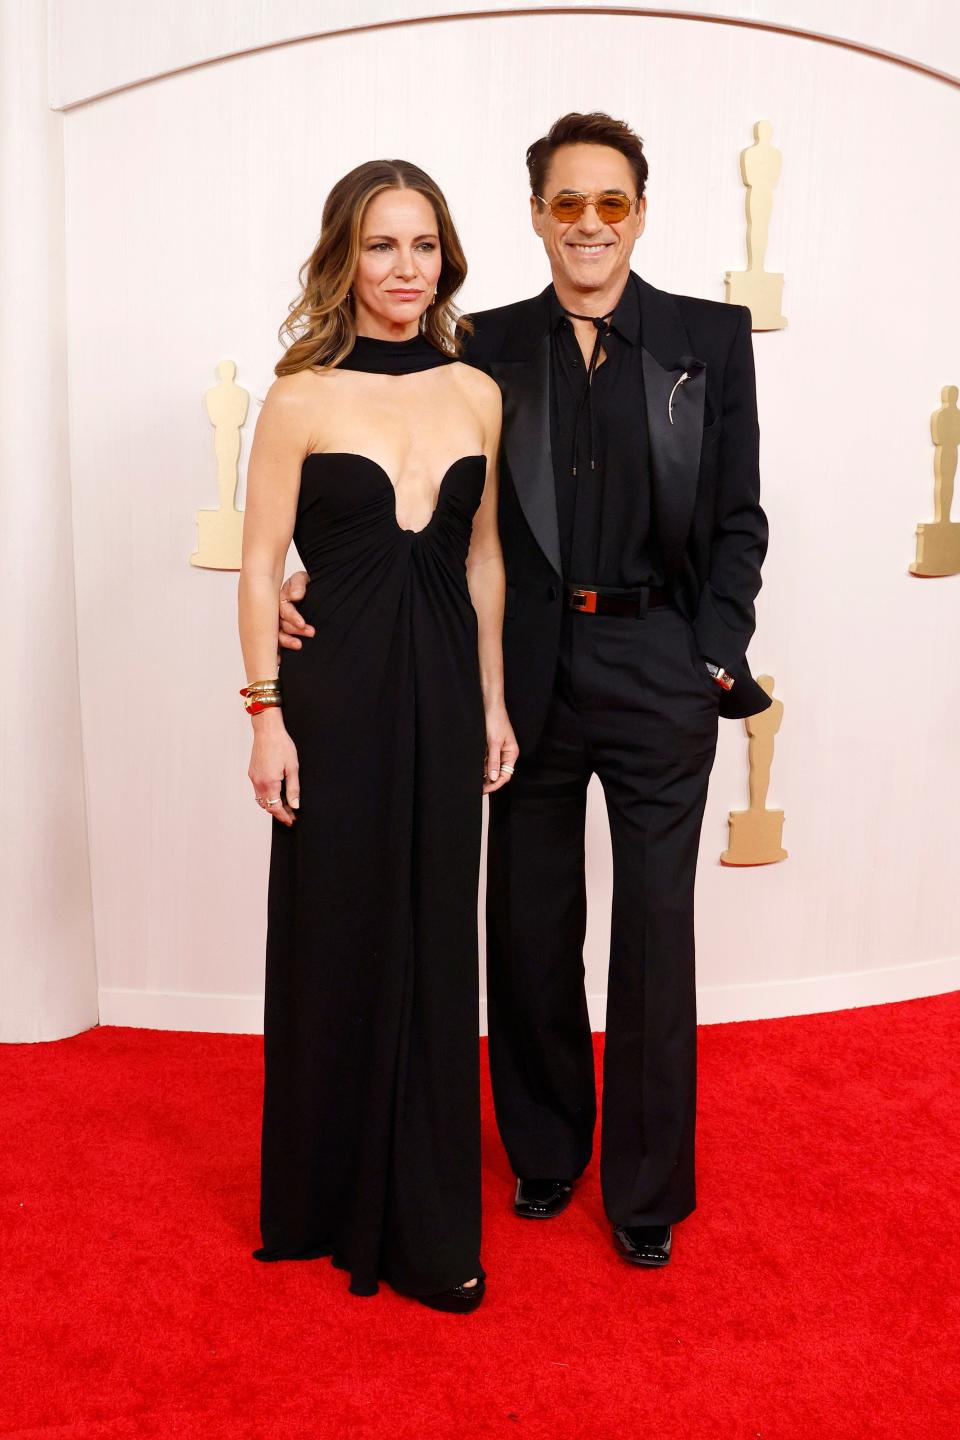 Susan Downey and Robert Downey Jr. attend the 96th Annual Academy Awards on March 10.